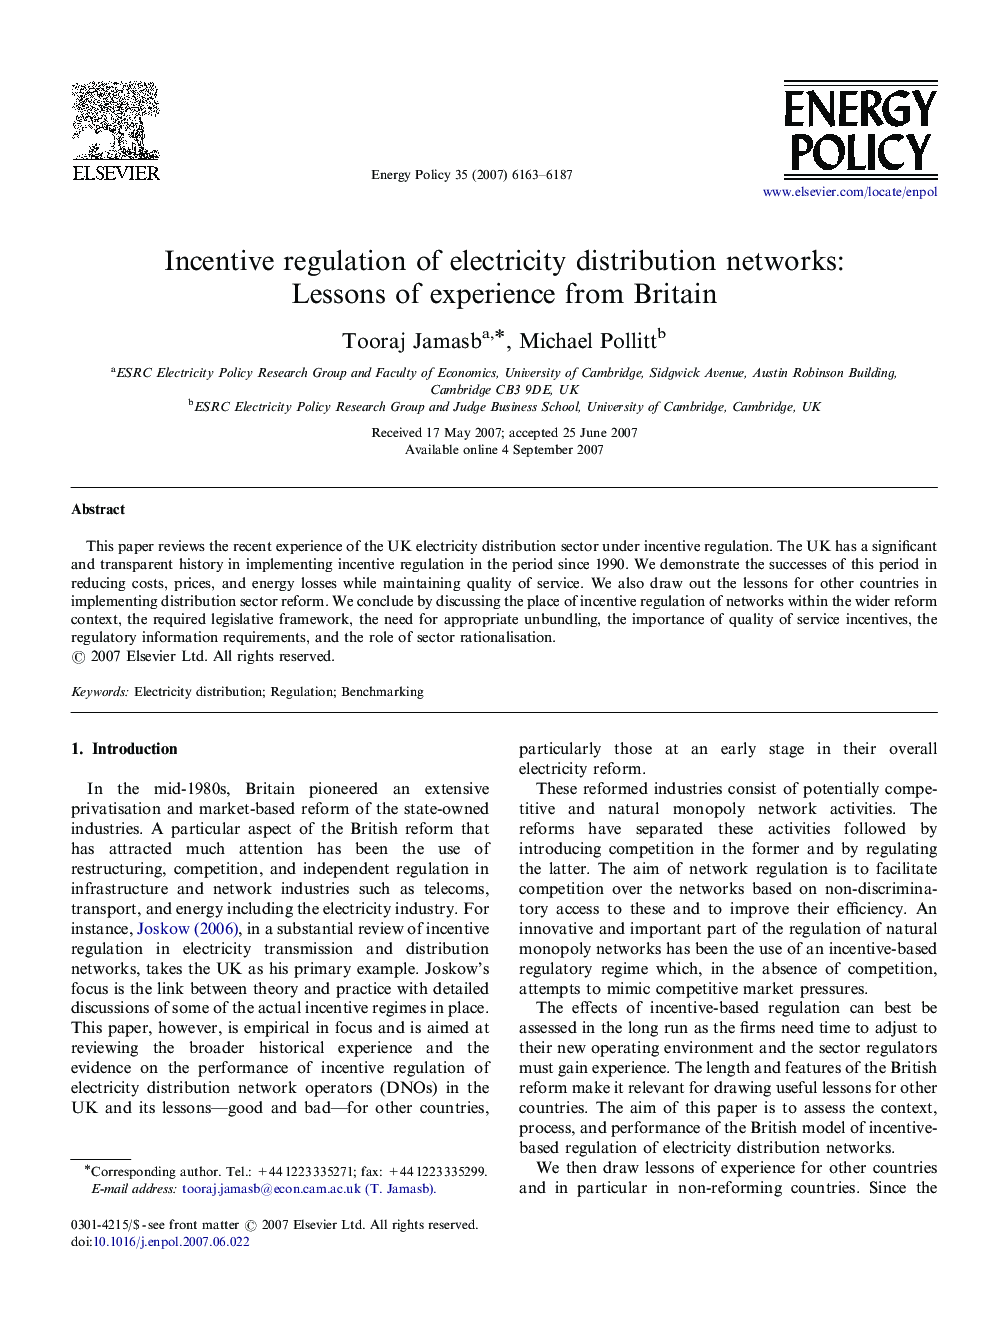 Incentive regulation of electricity distribution networks: Lessons of experience from Britain